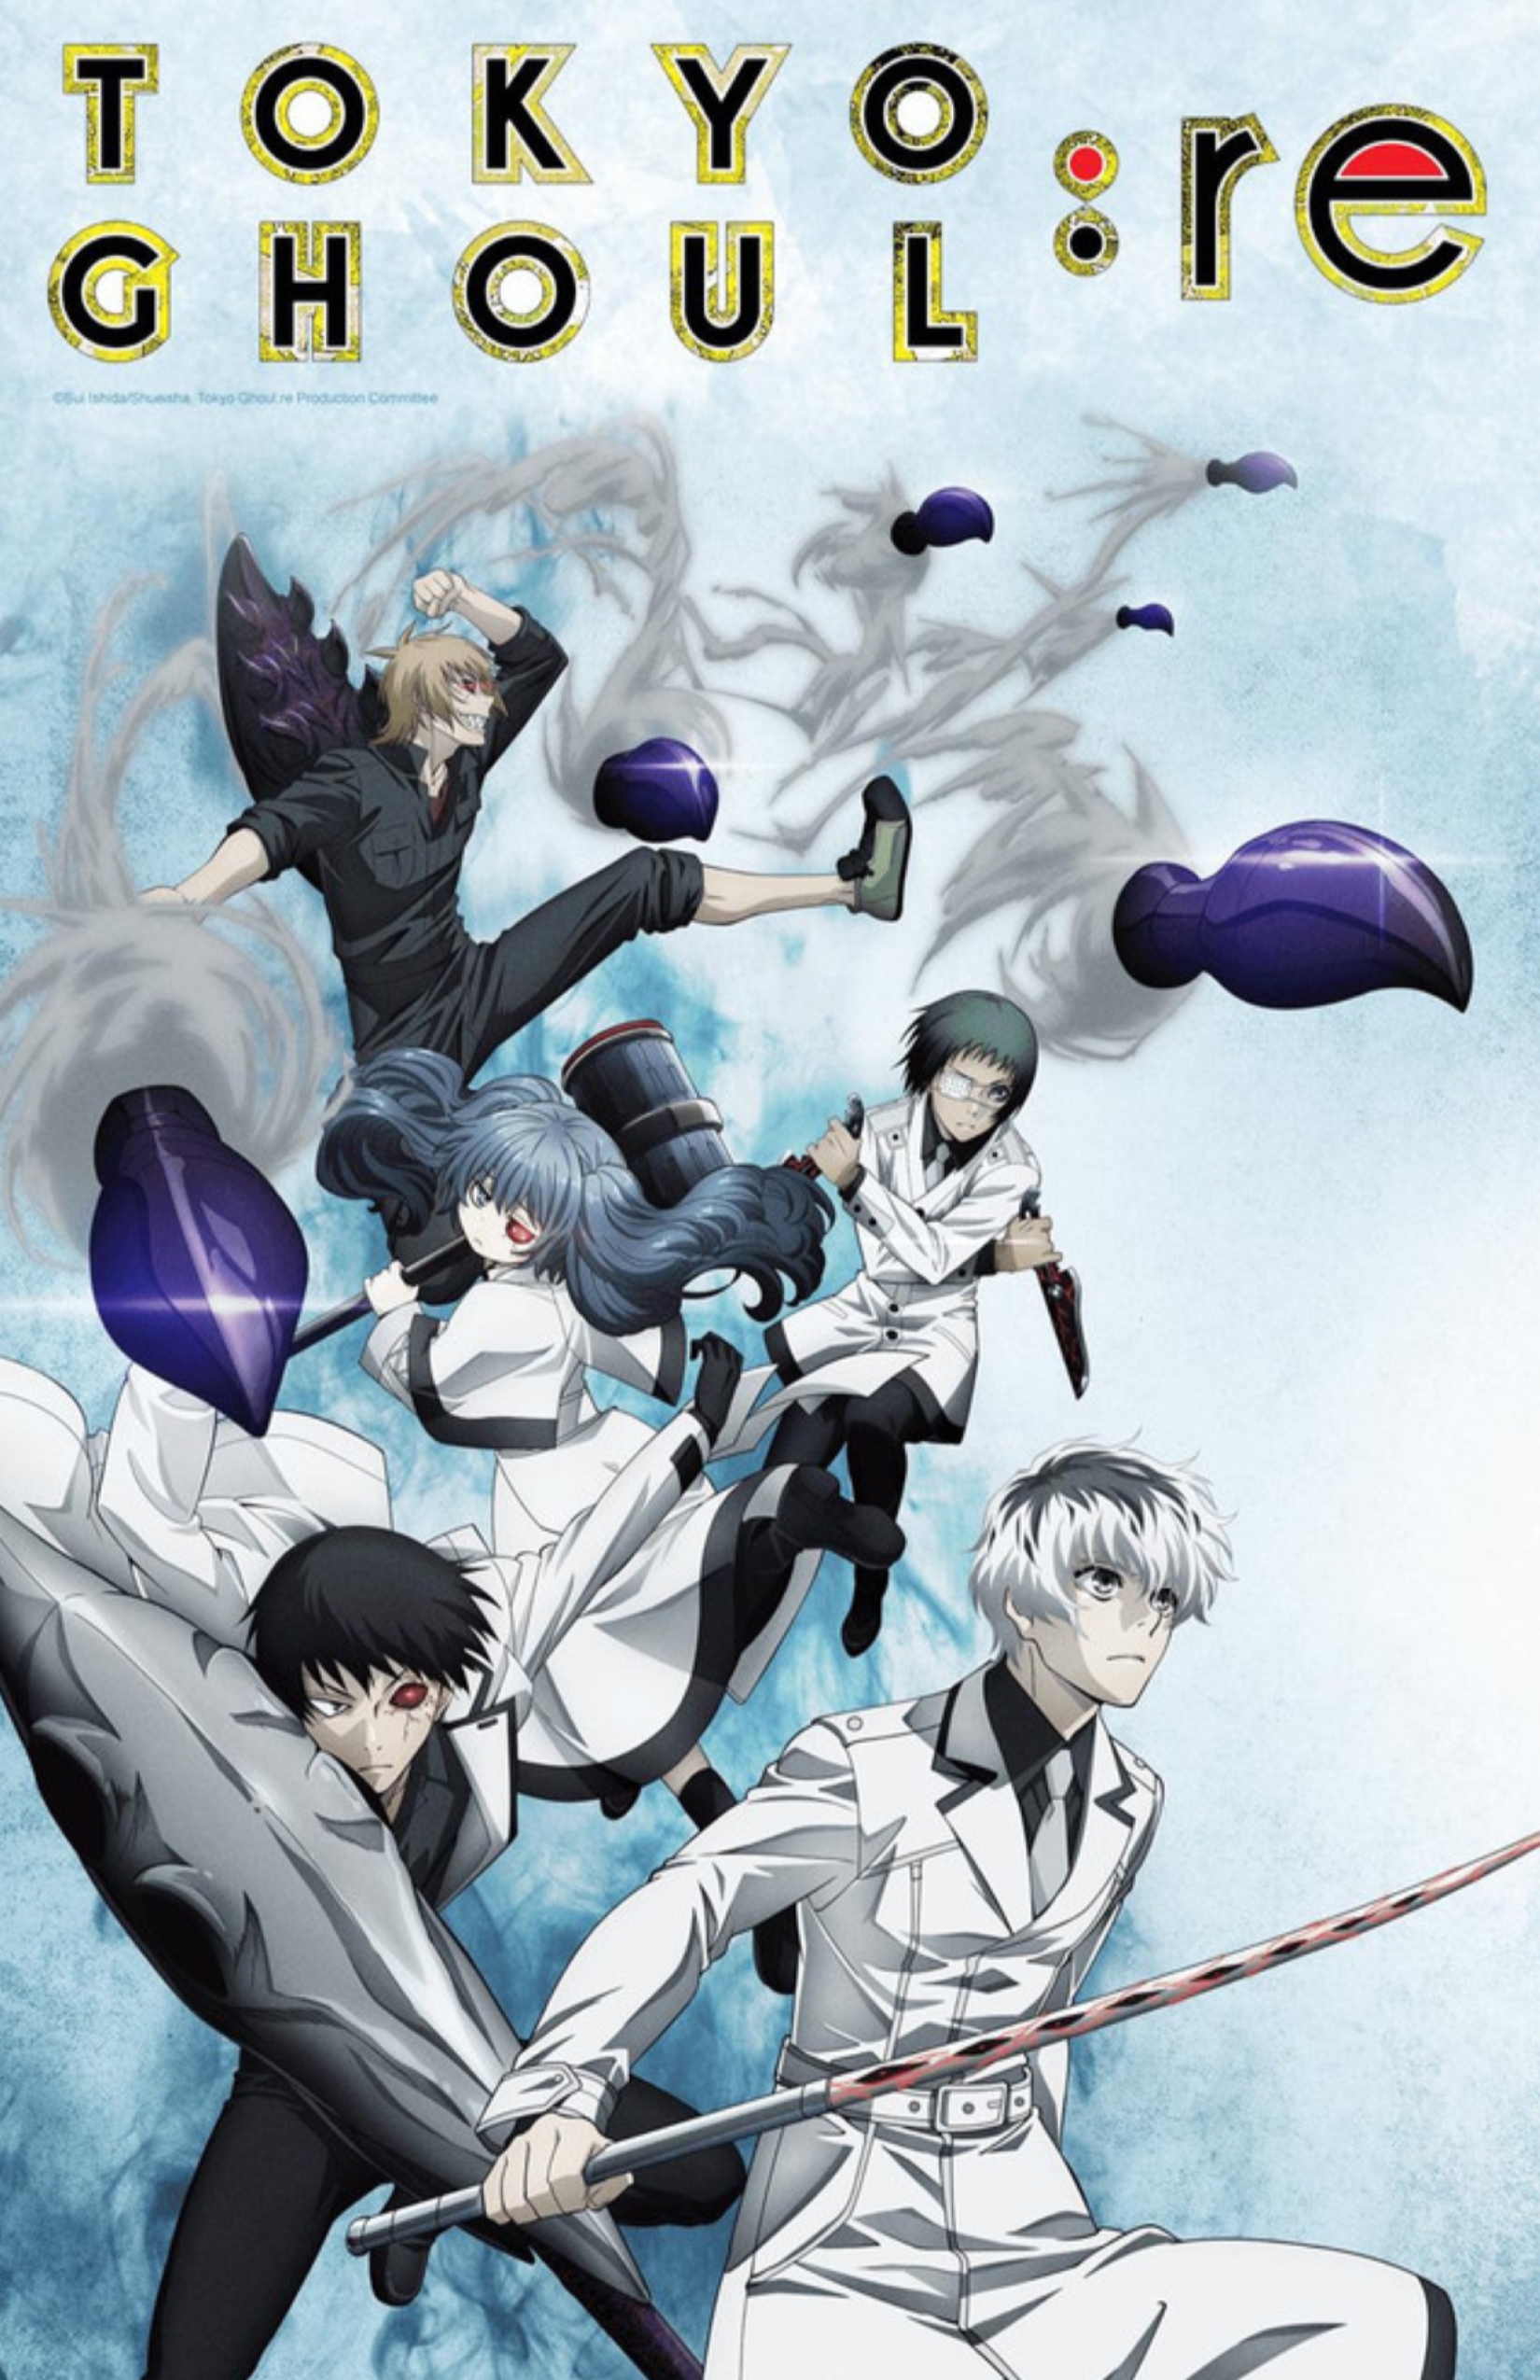 Tokyo Ghoul: re (S01 - S02)